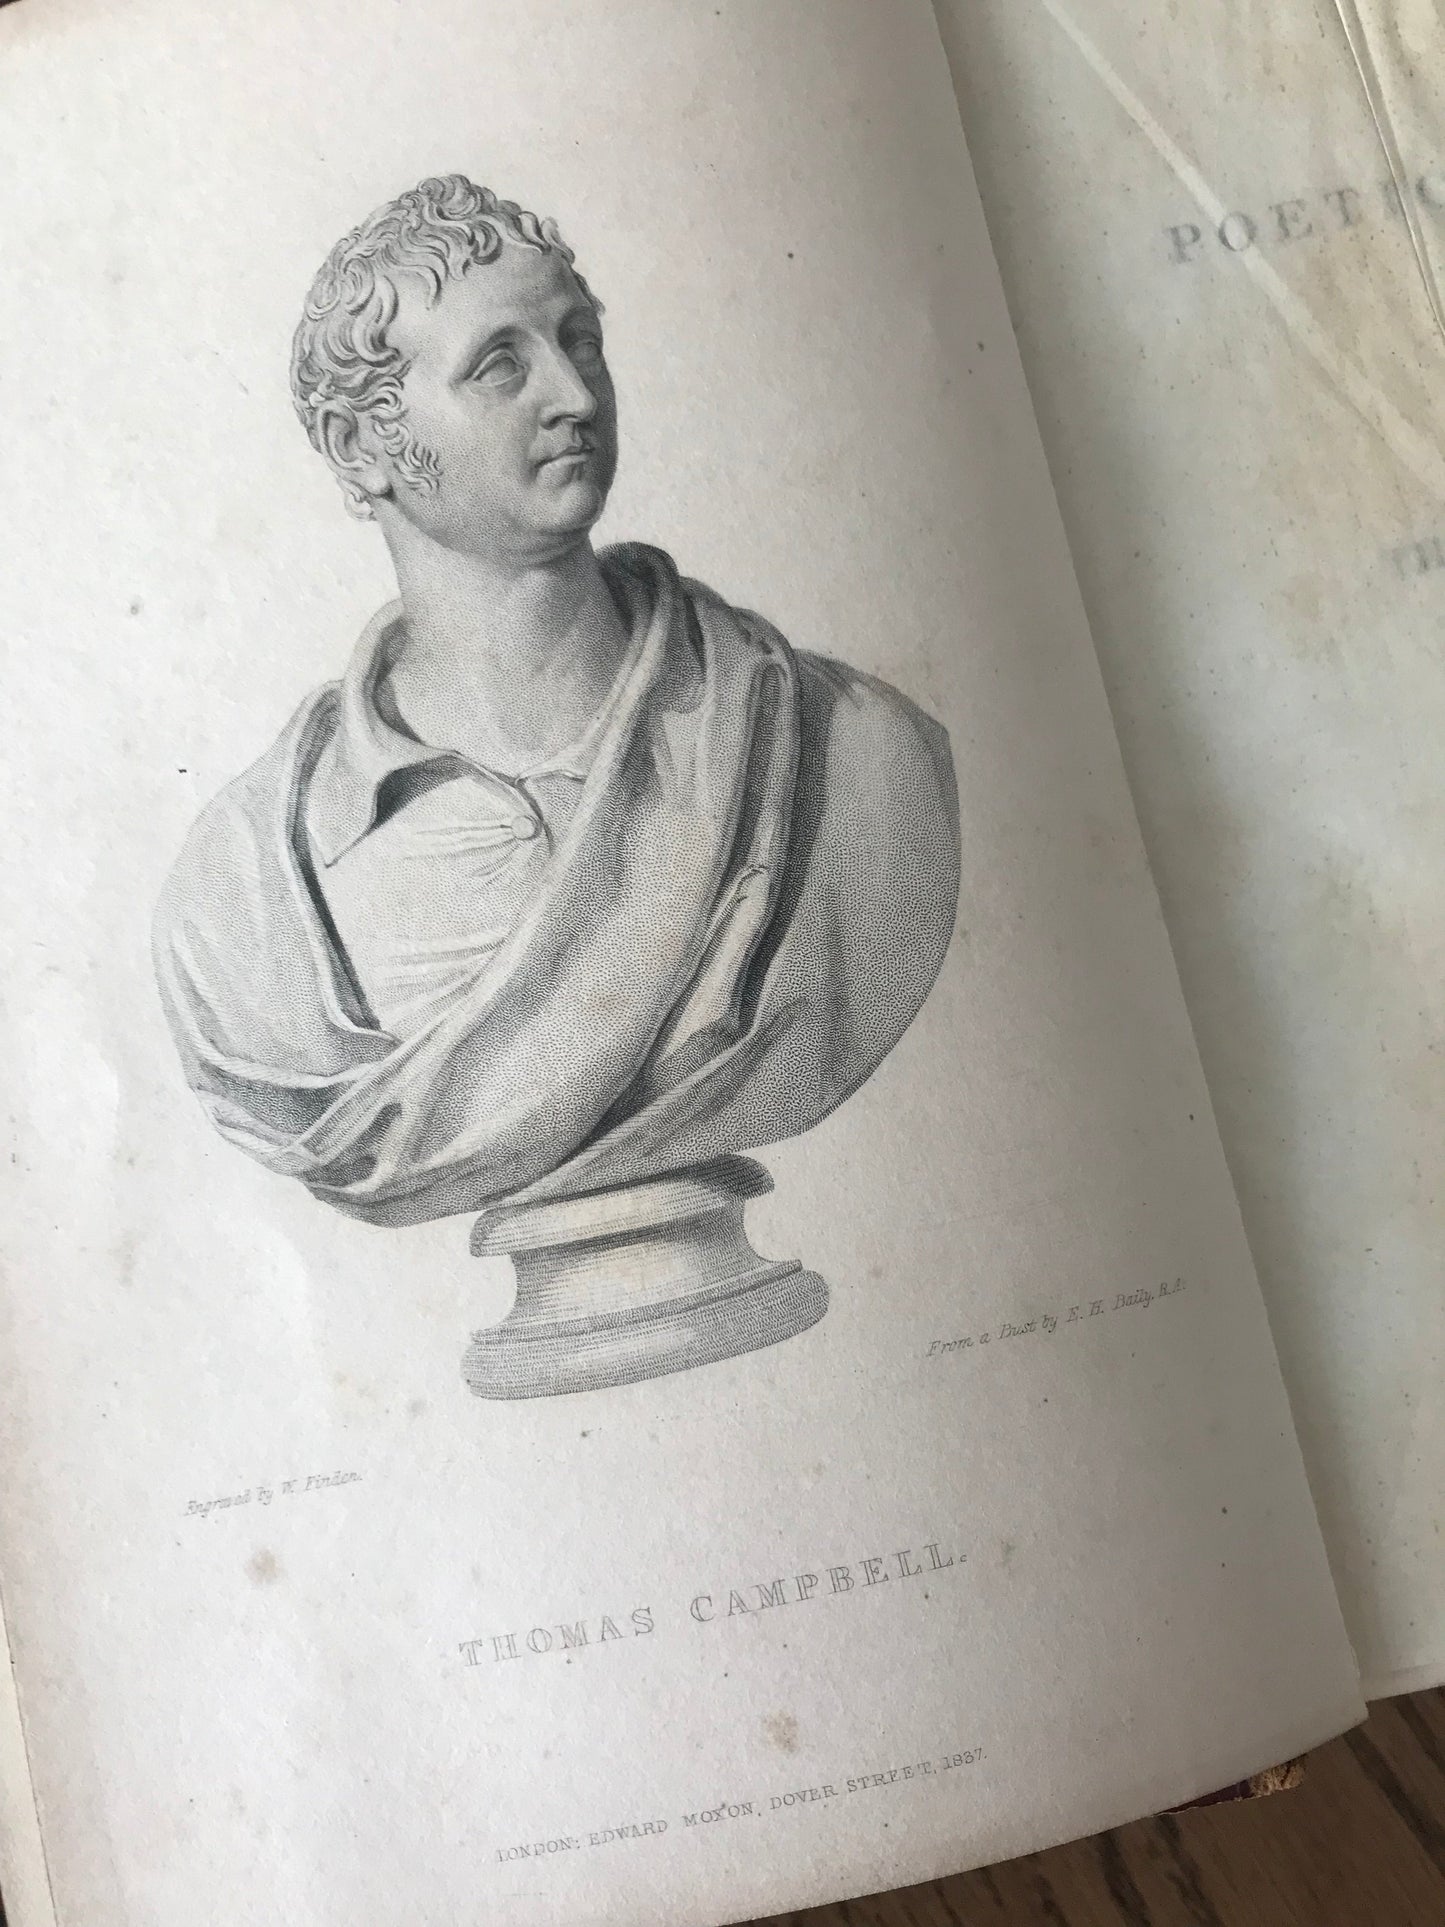 THE POETICAL WORKS OF THOMAS CAMPBELL BooksCardsNBikes